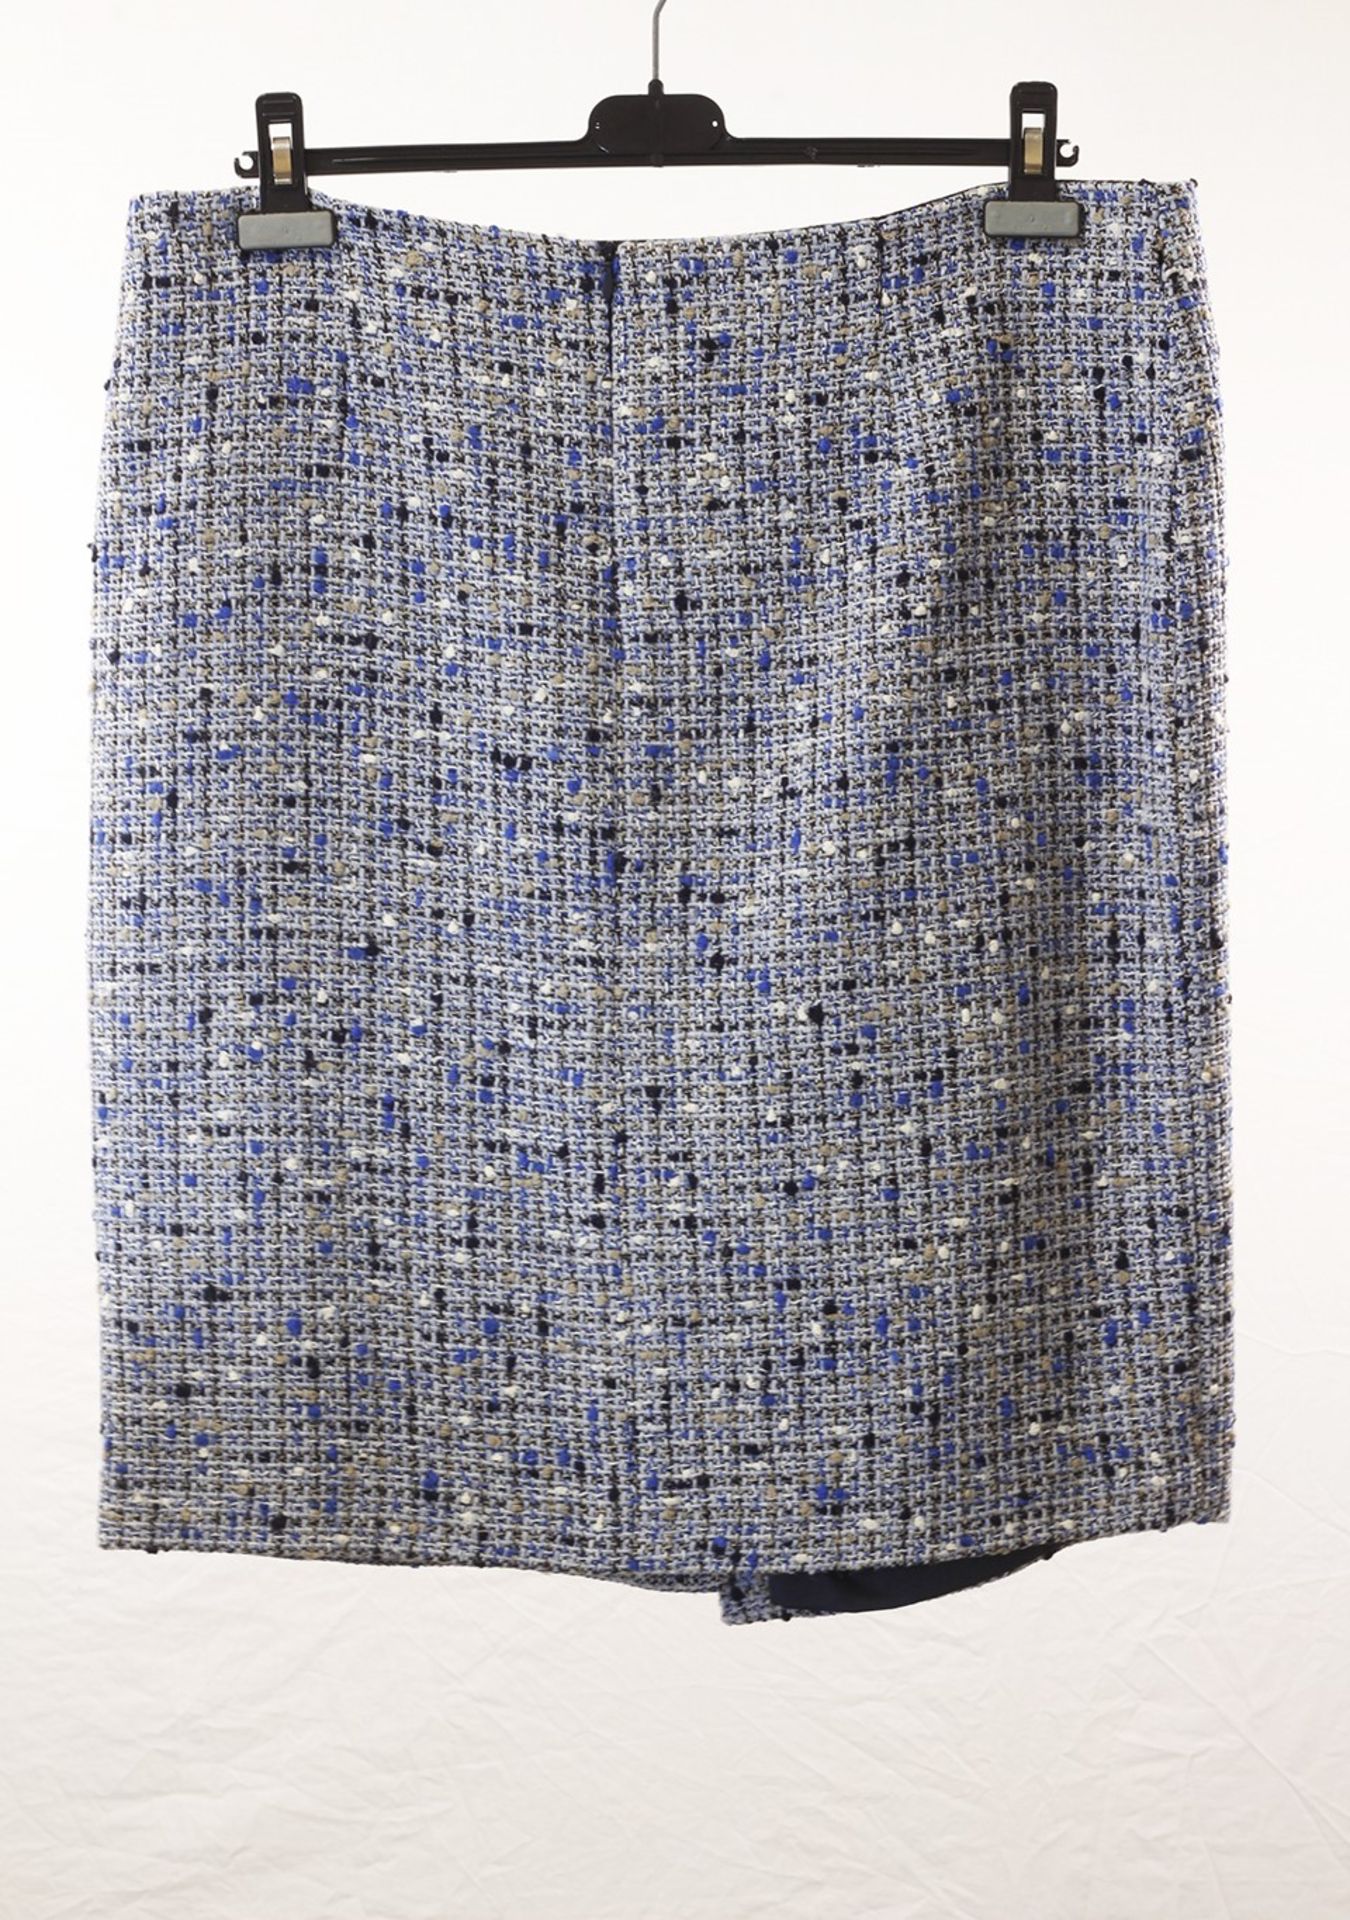 1 x Anne Belin Blue Tweed Skirt - Size: 20 - From A High End Clothing Boutique - Image 3 of 7